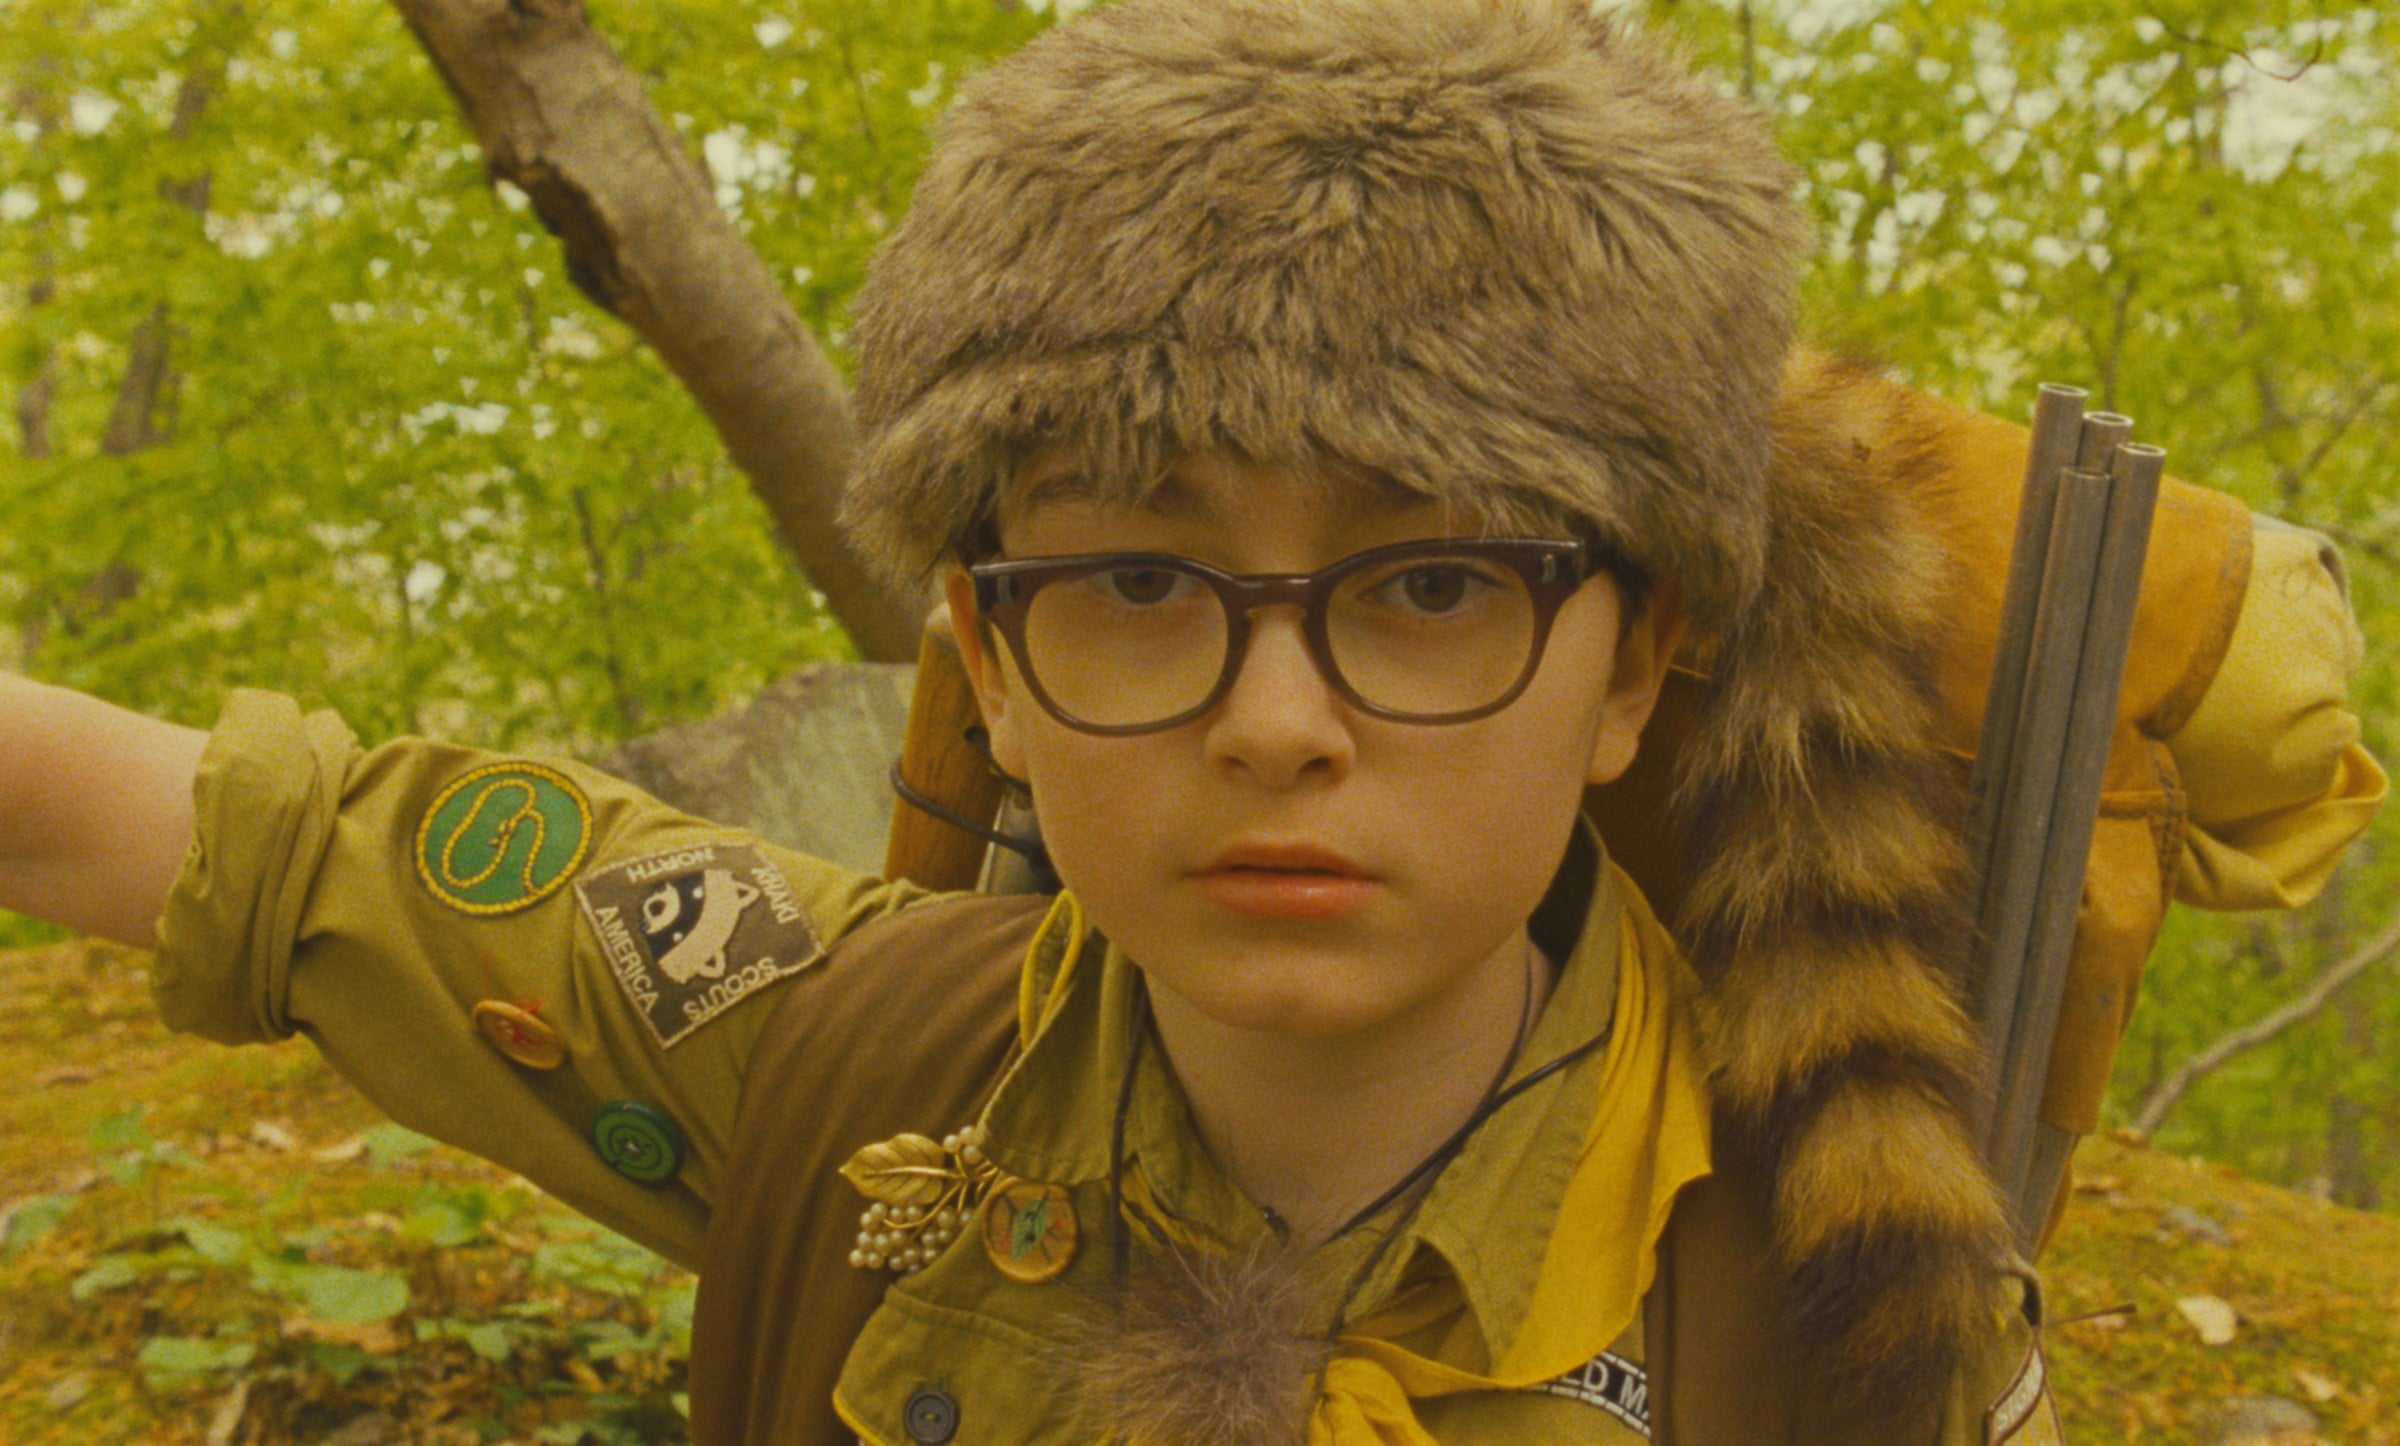 10 Wes Anderson Inspired Halloween Costume Ideas